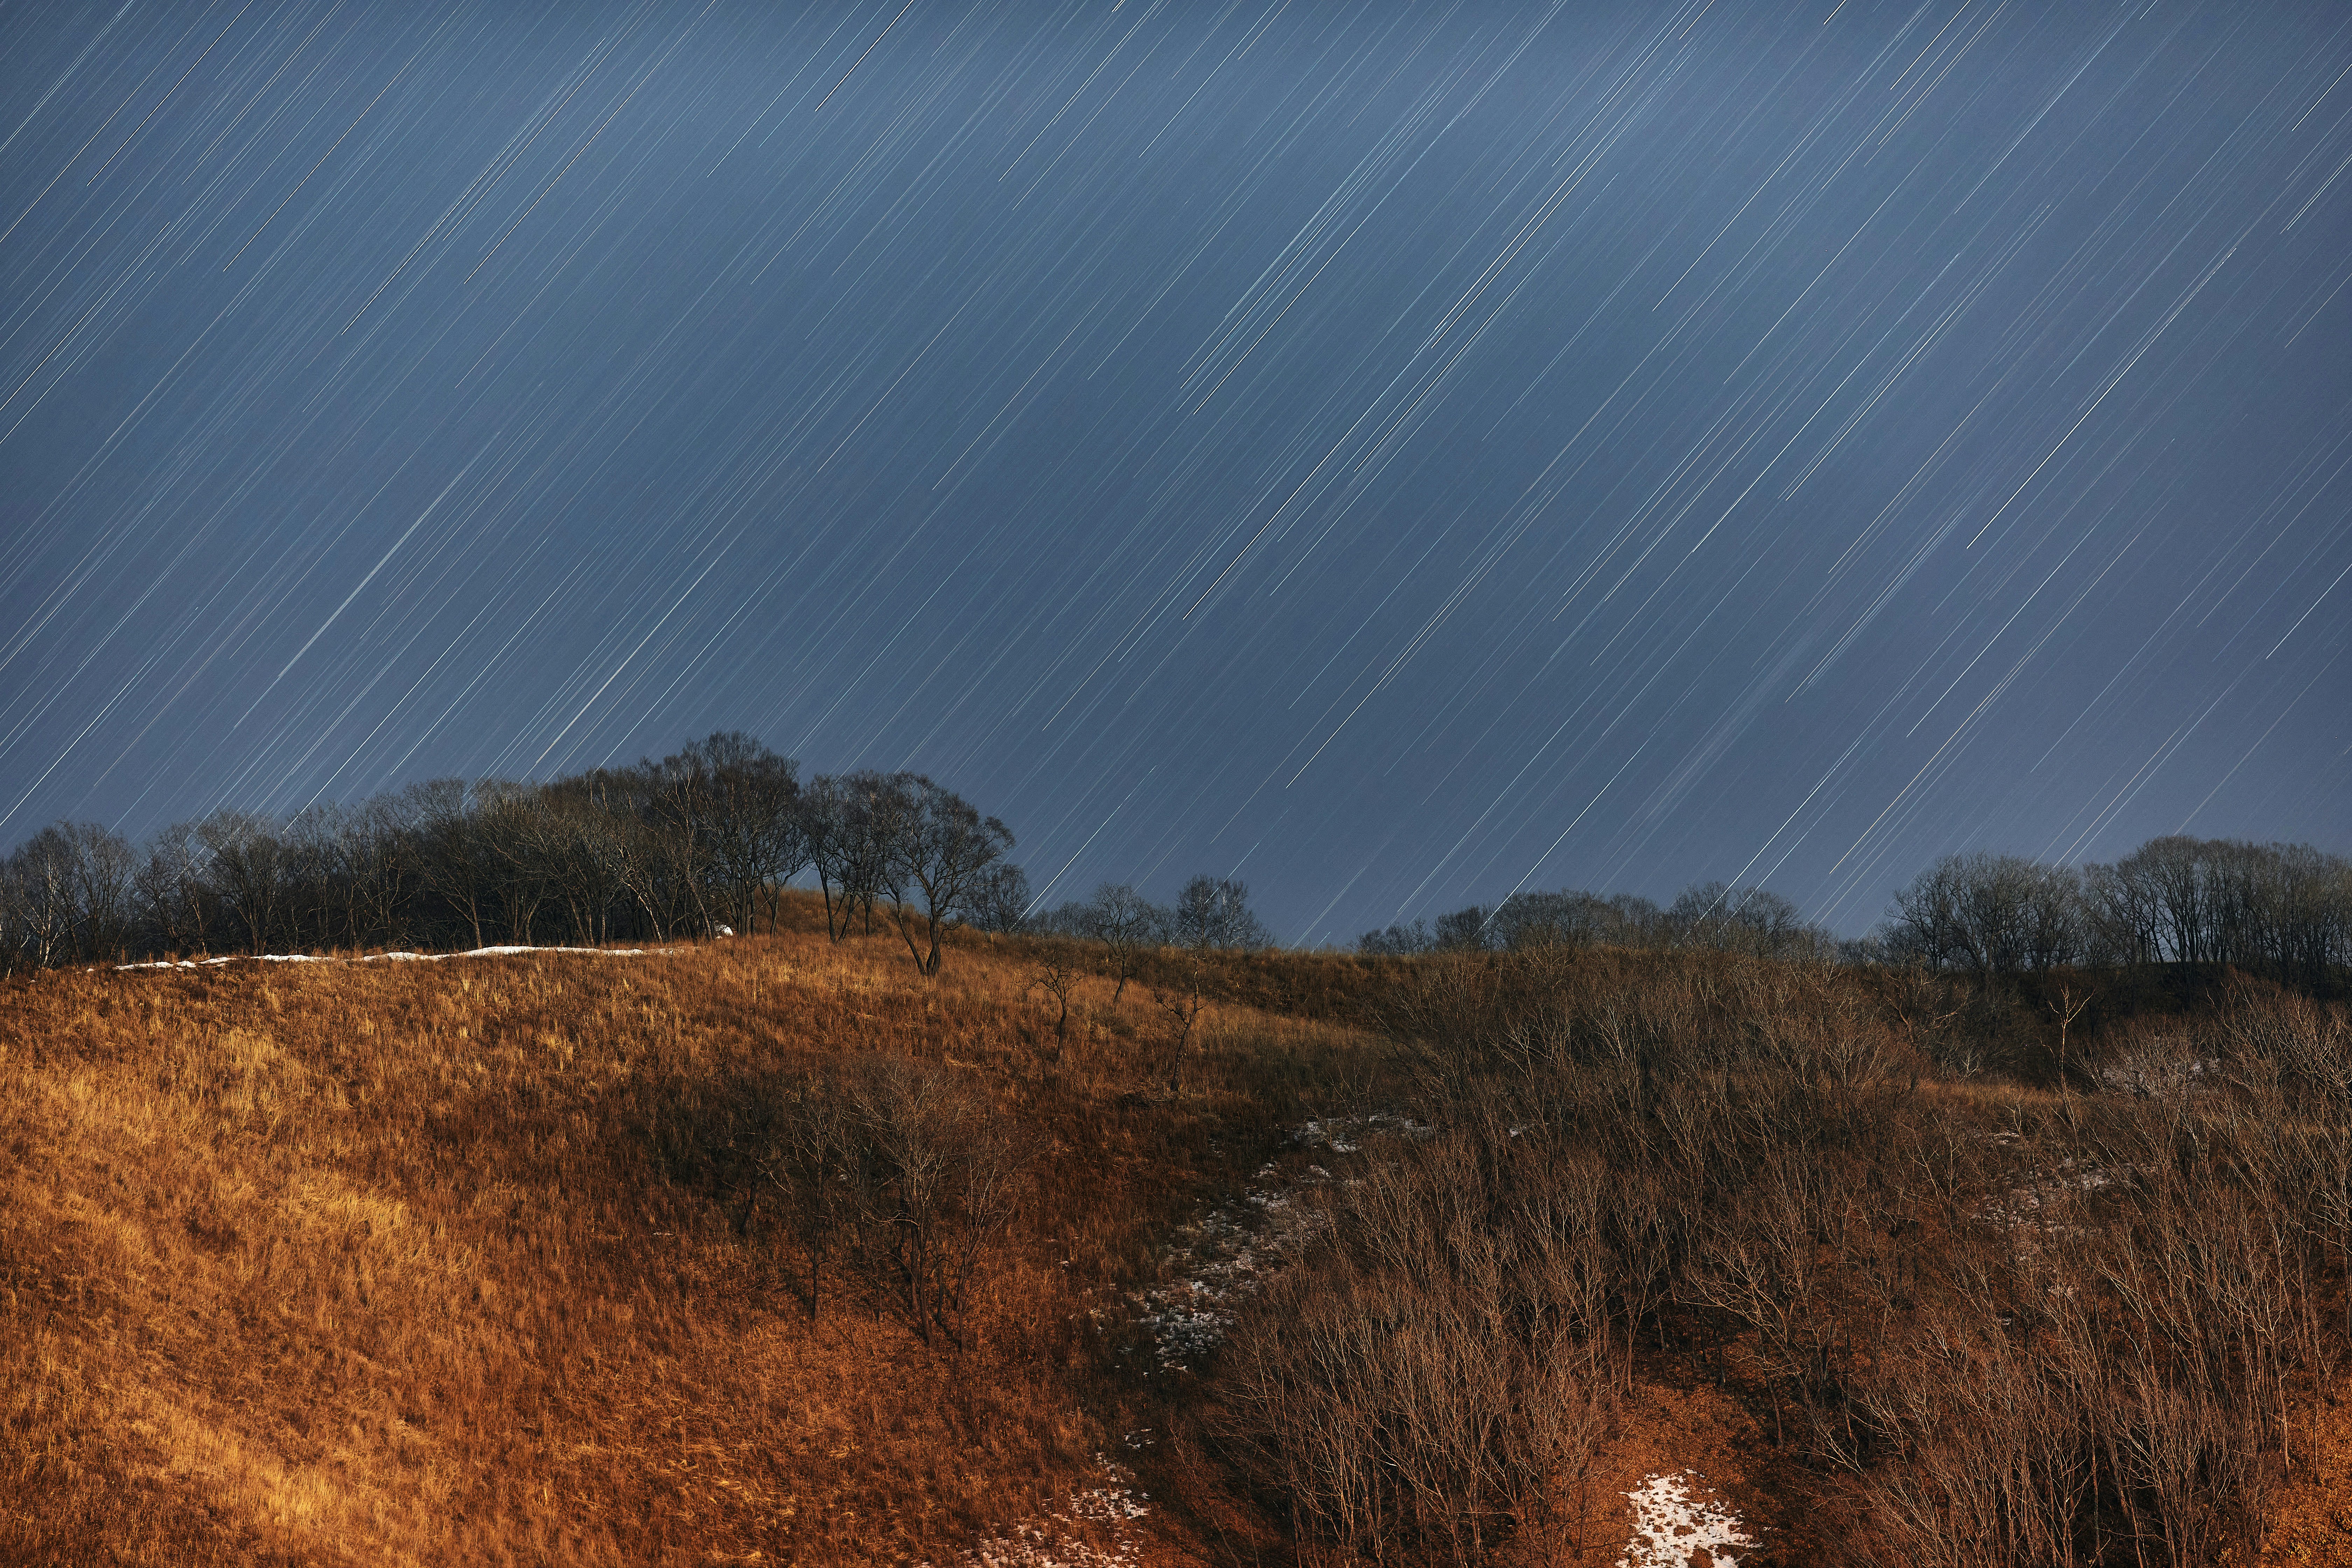 Star trails in the sky over a mountain overgrown with an oak forest, Russia, Primorsky Krai, Zolotaya Dolina. Stylish background with star tracks, mountain and forest for website, twitter, instagram, social or news media